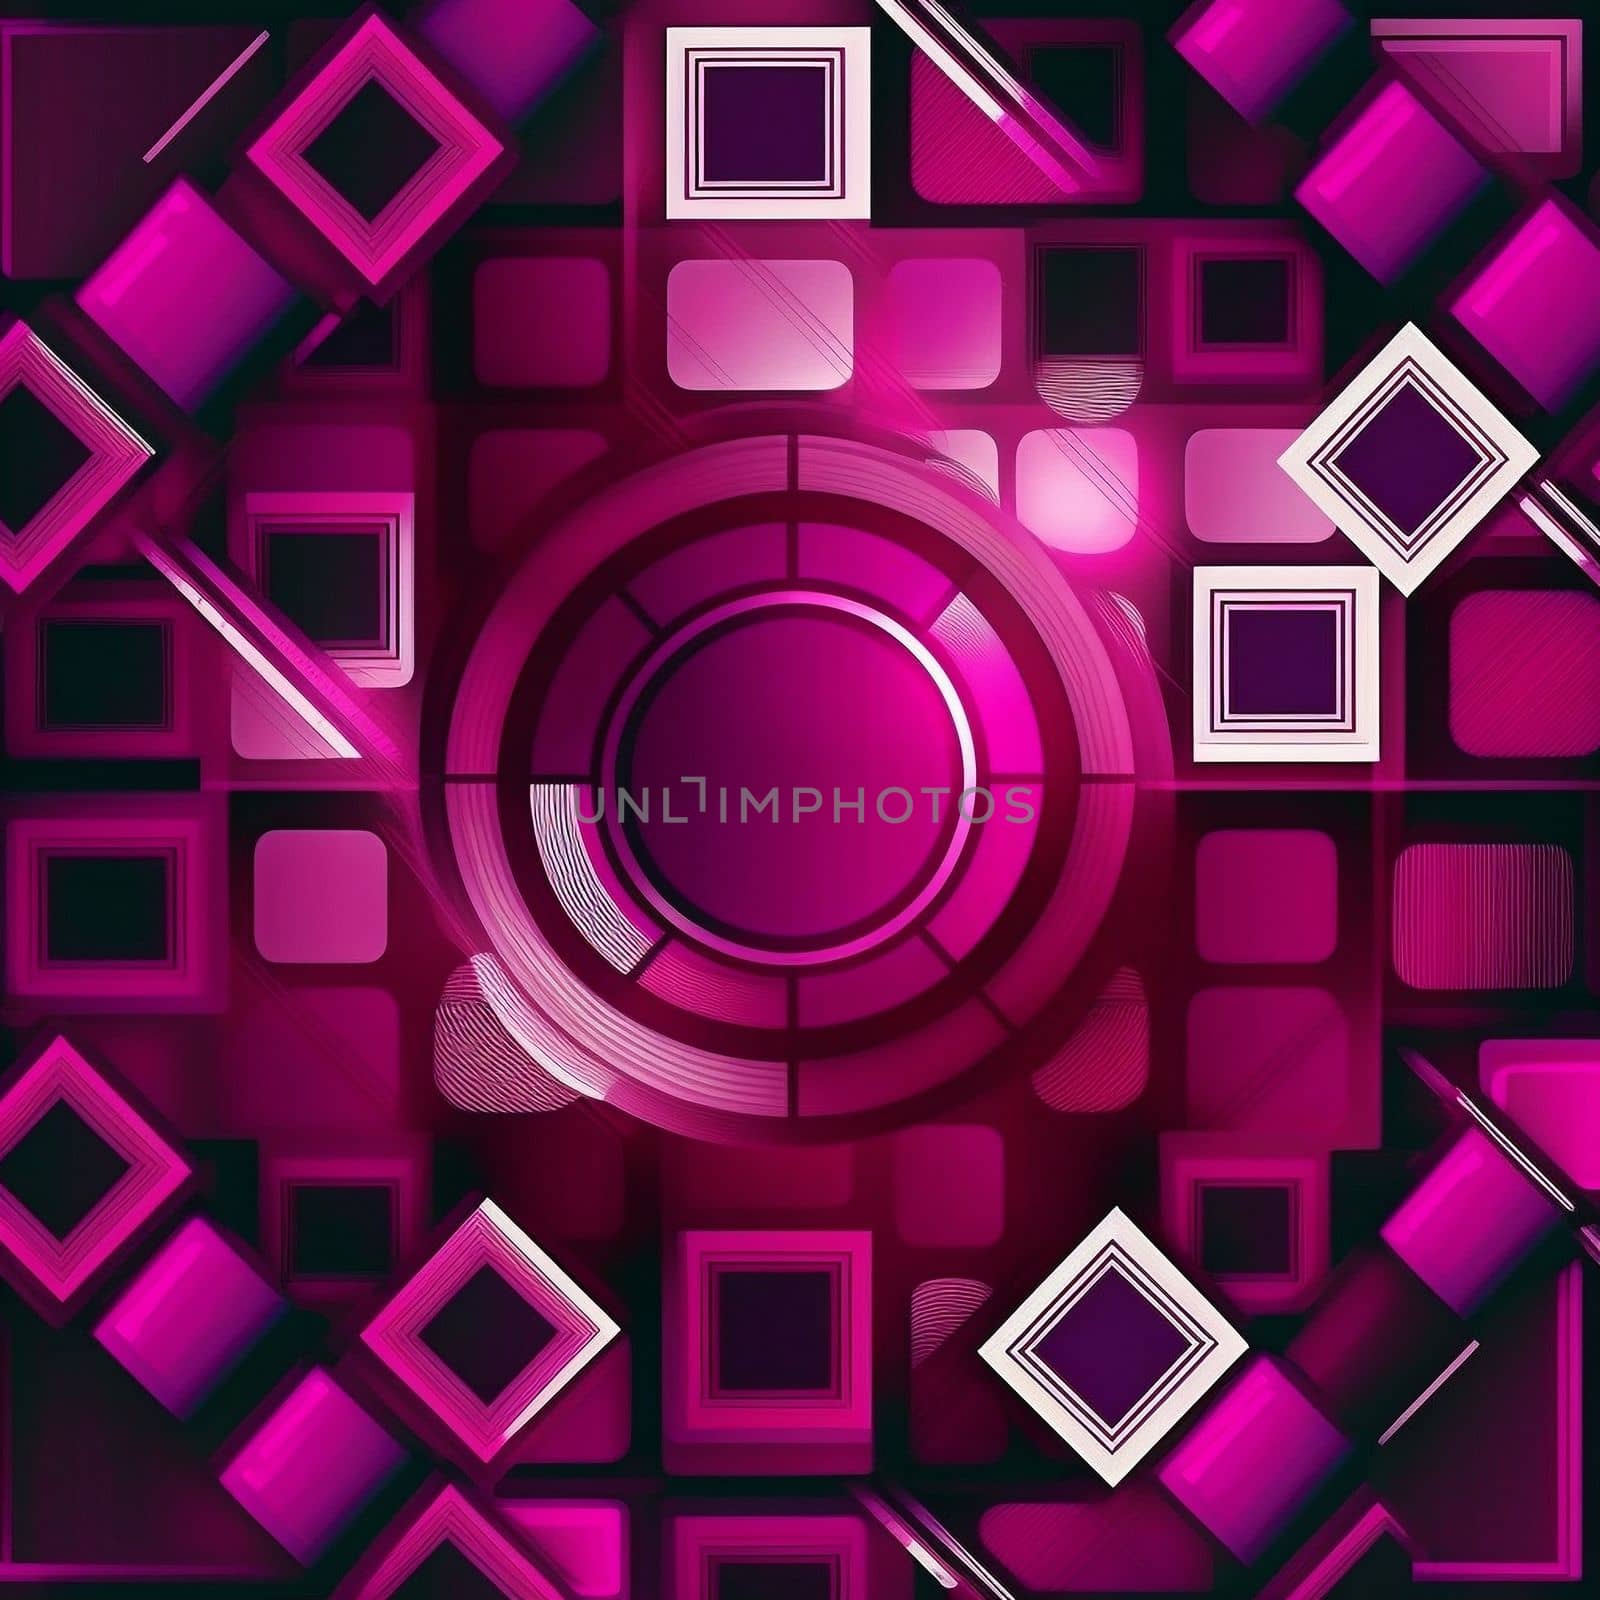 Panton next year, magenta, neon geometric shapes, background by NeuroSky